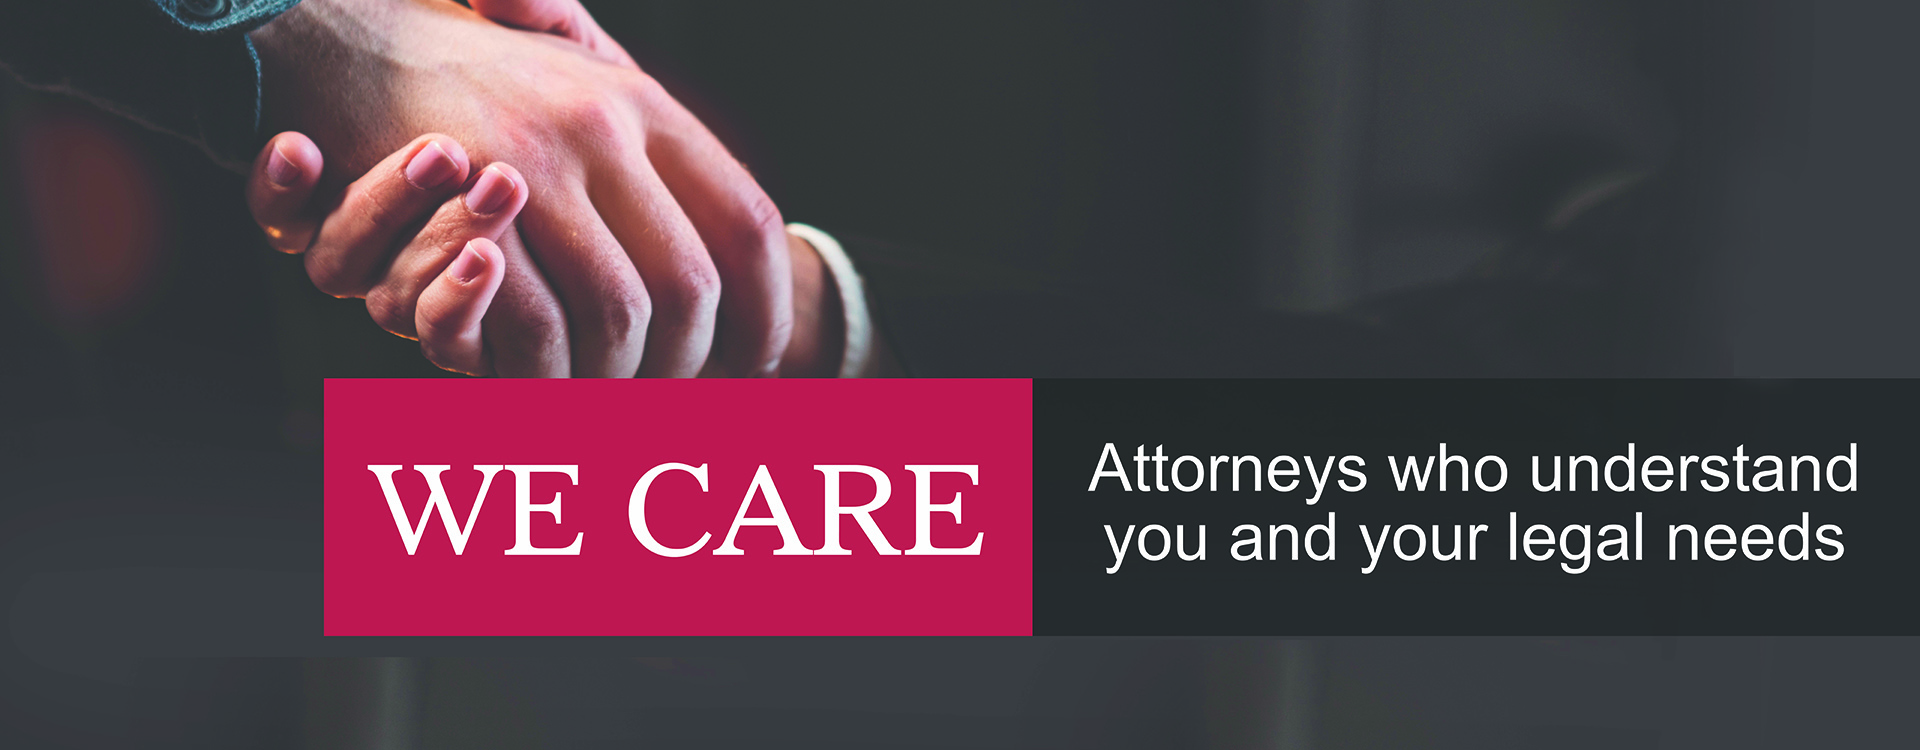 We care. Attorneys who understand you and your needs.